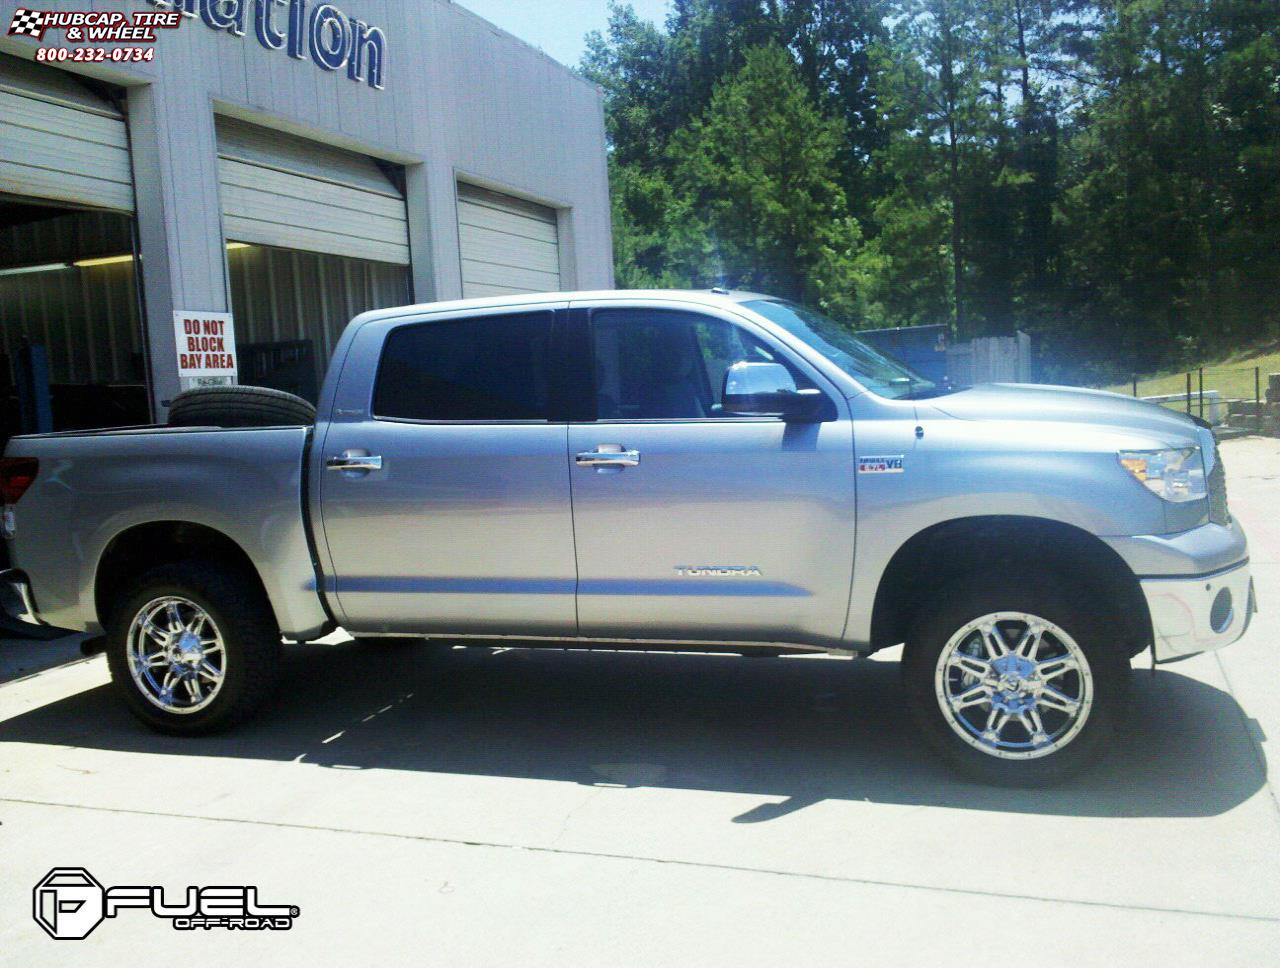 vehicle gallery/toyota tundra fuel octane d508 0X0  Chrome wheels and rims